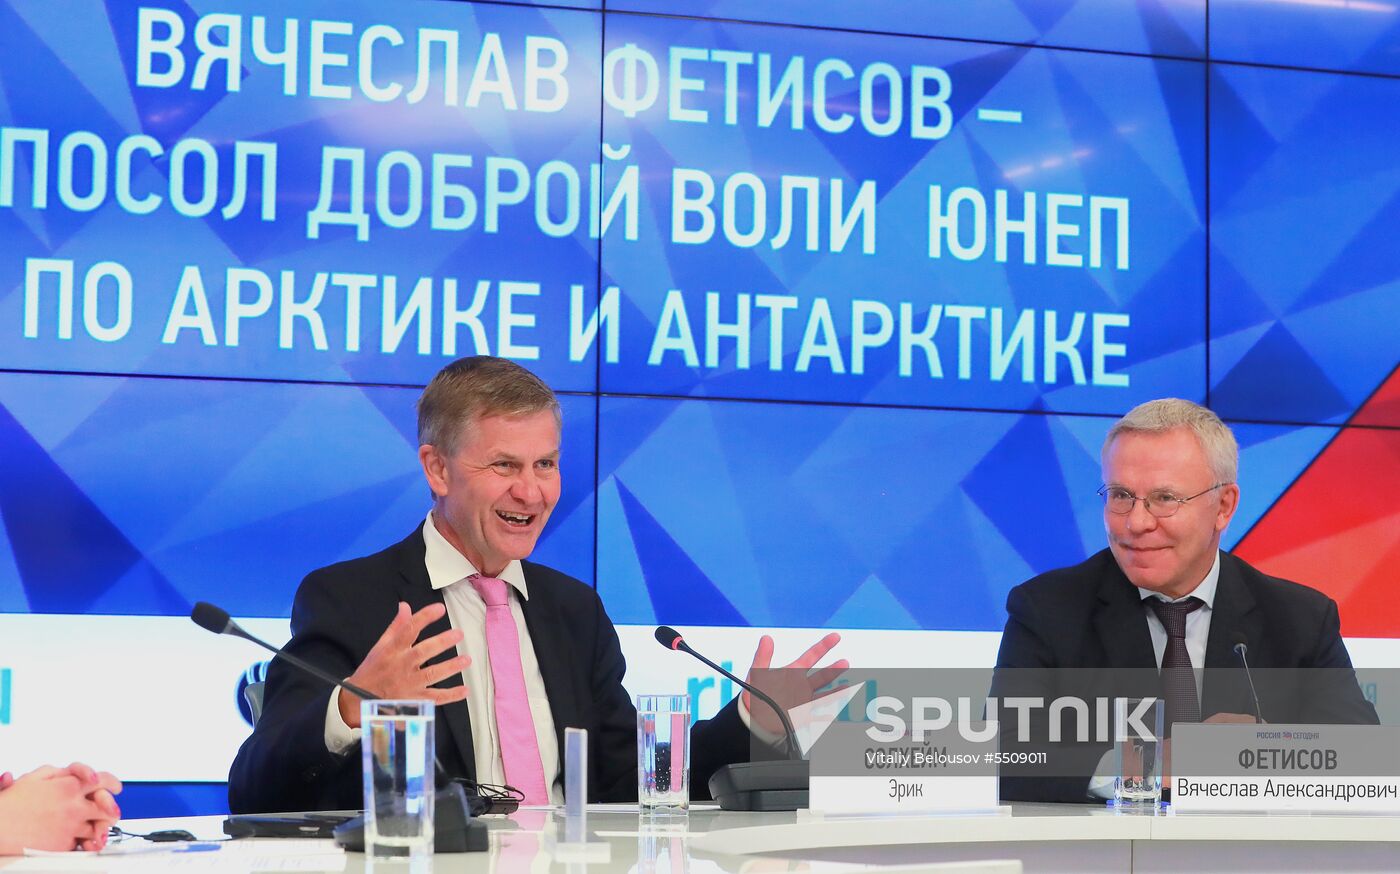 News conference on Vyacheslav Fetisov's appointment as UN Goodwill Ambassador for Arctic and Antarctic